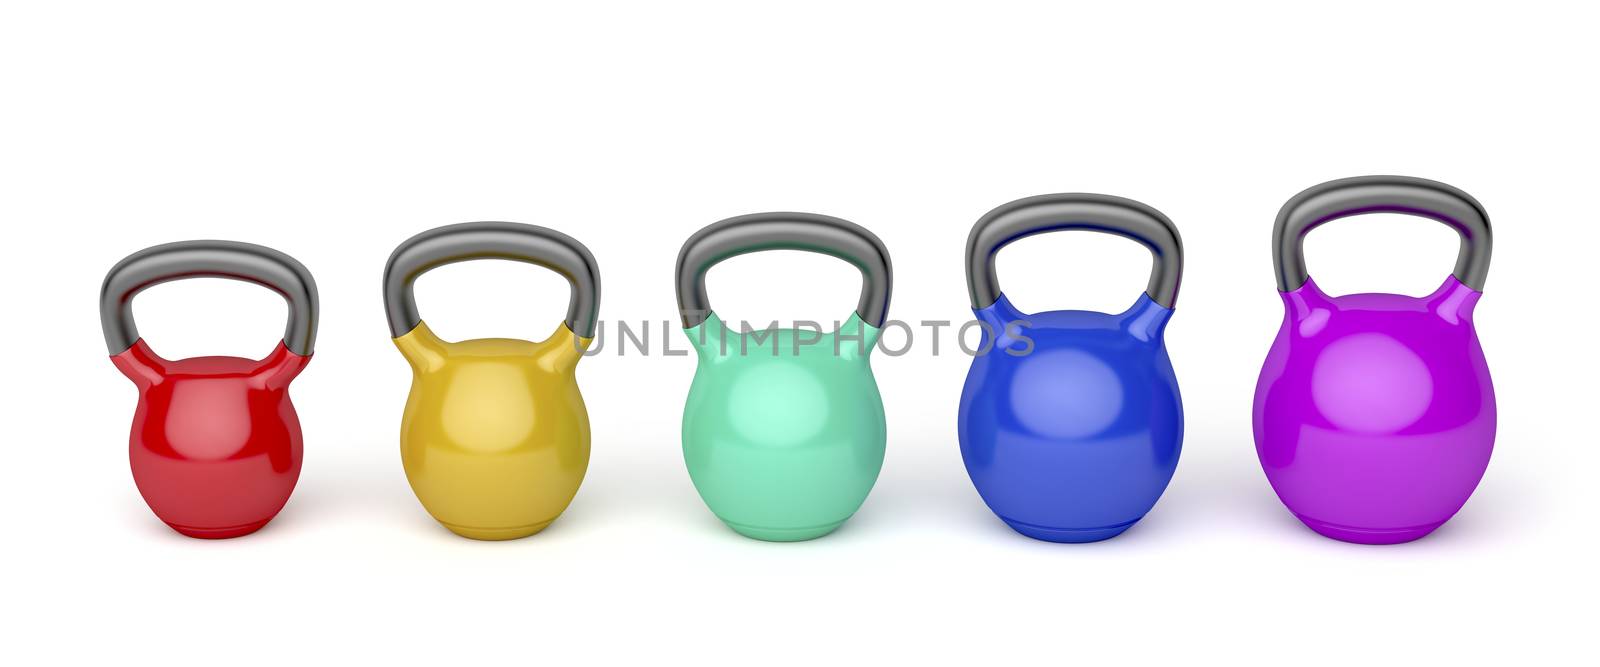 Kettlebells with different sizes by magraphics